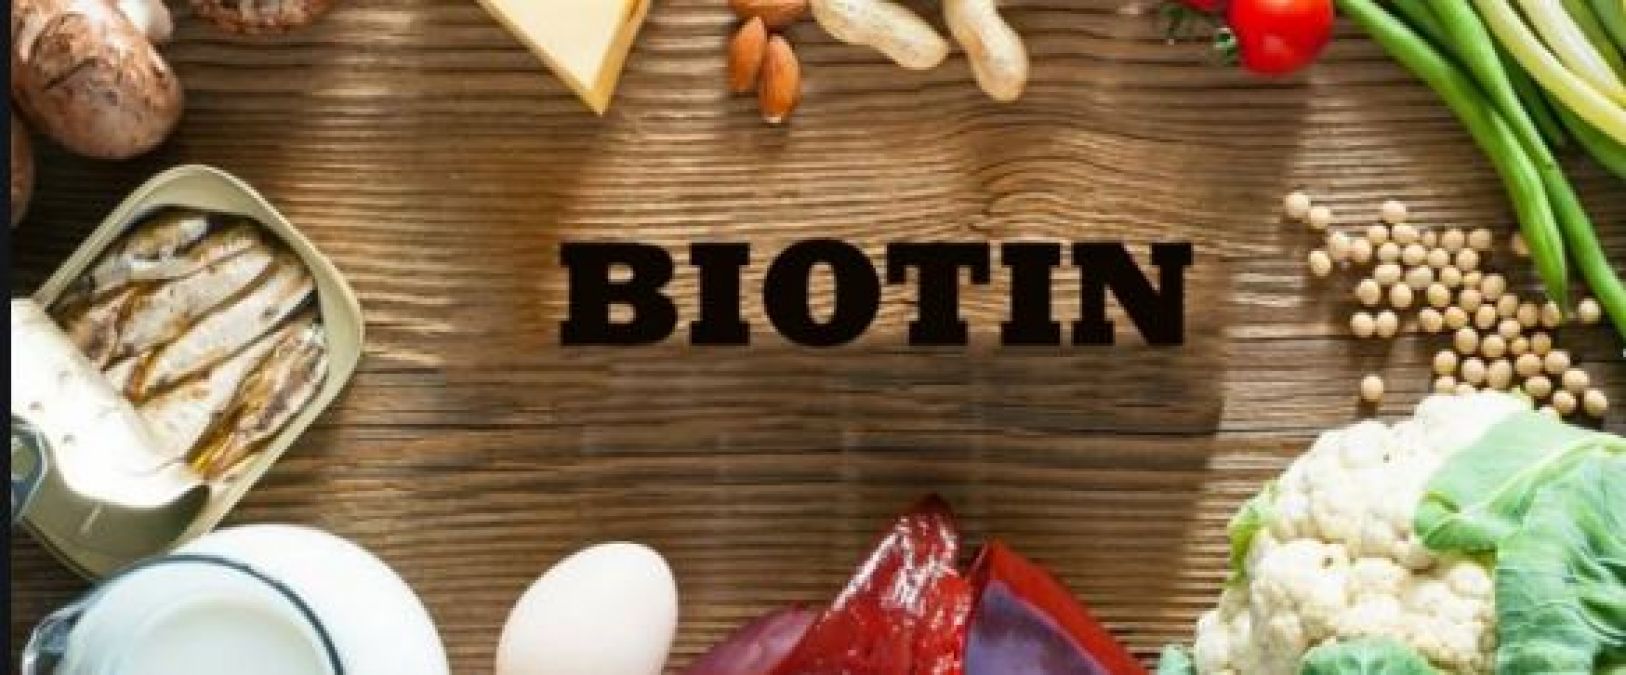 These 5 foods containing biotines will not require expensive hair treatment